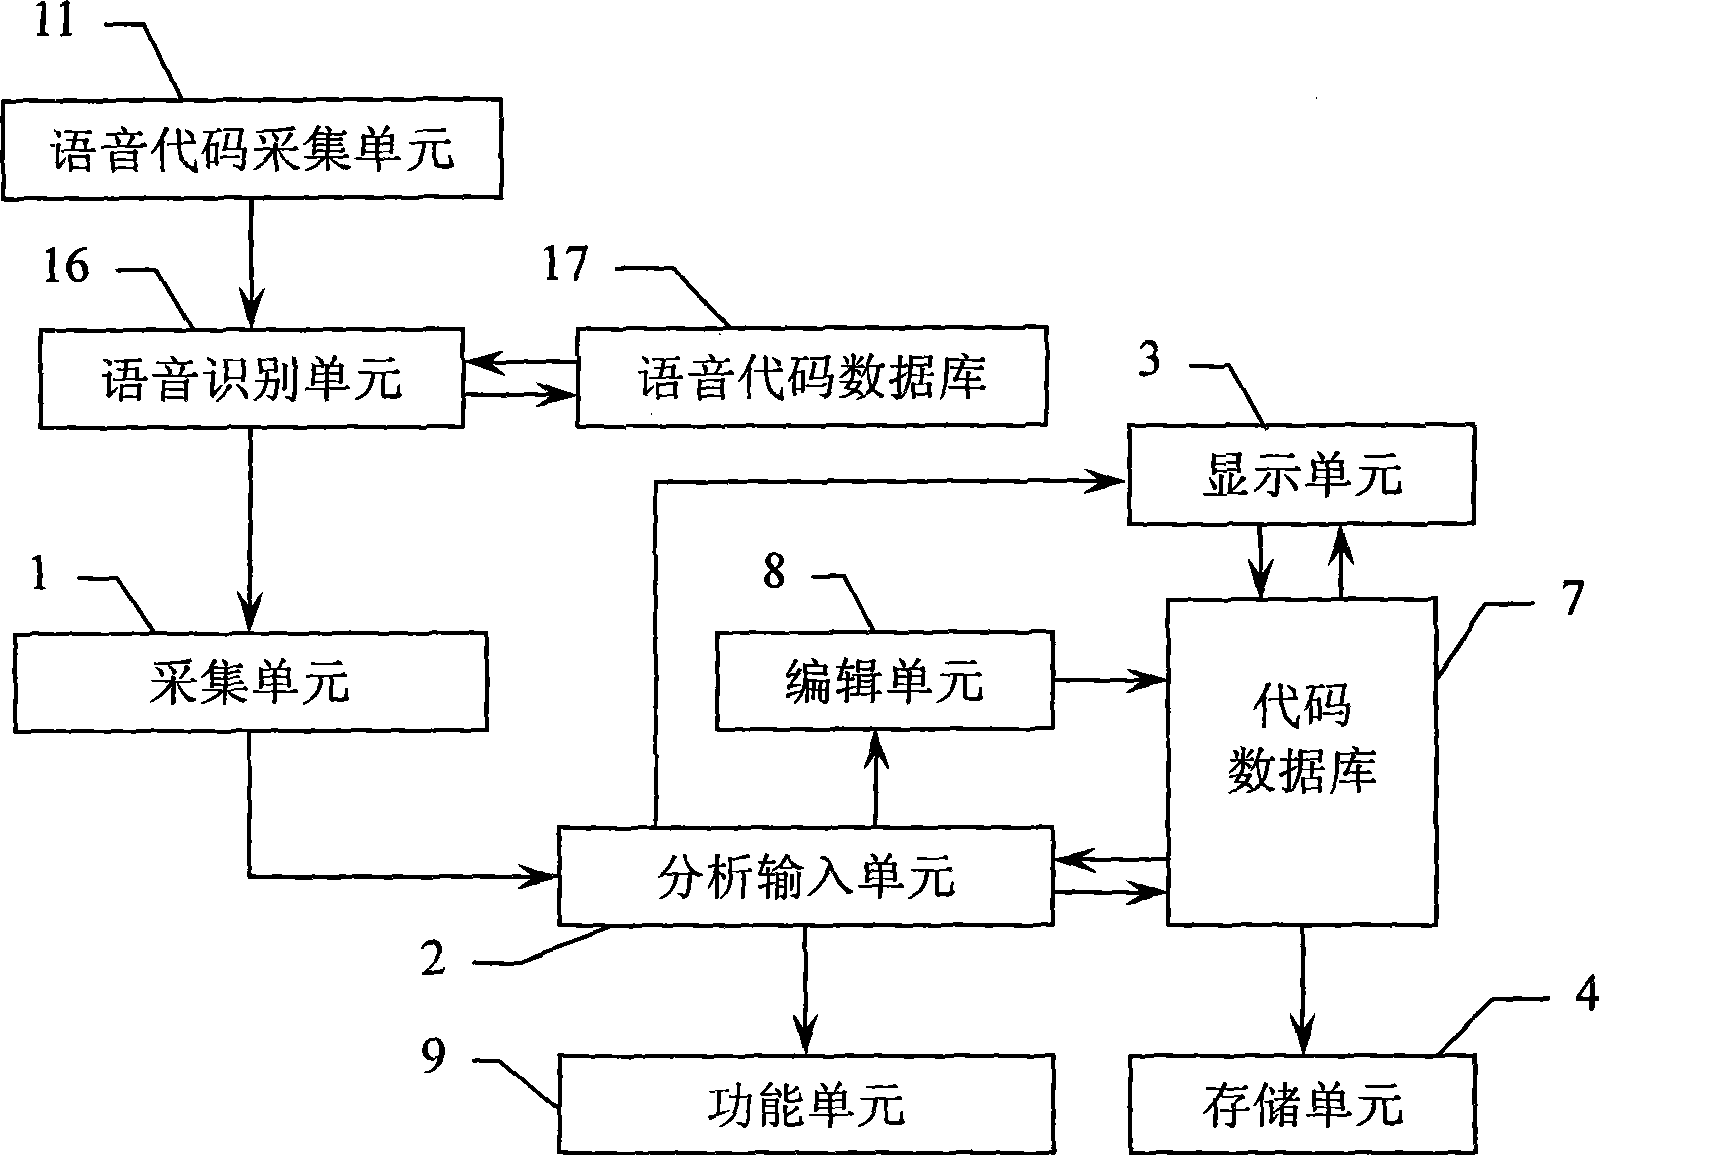 Hand-hold electronic equipment input system with code input selection function